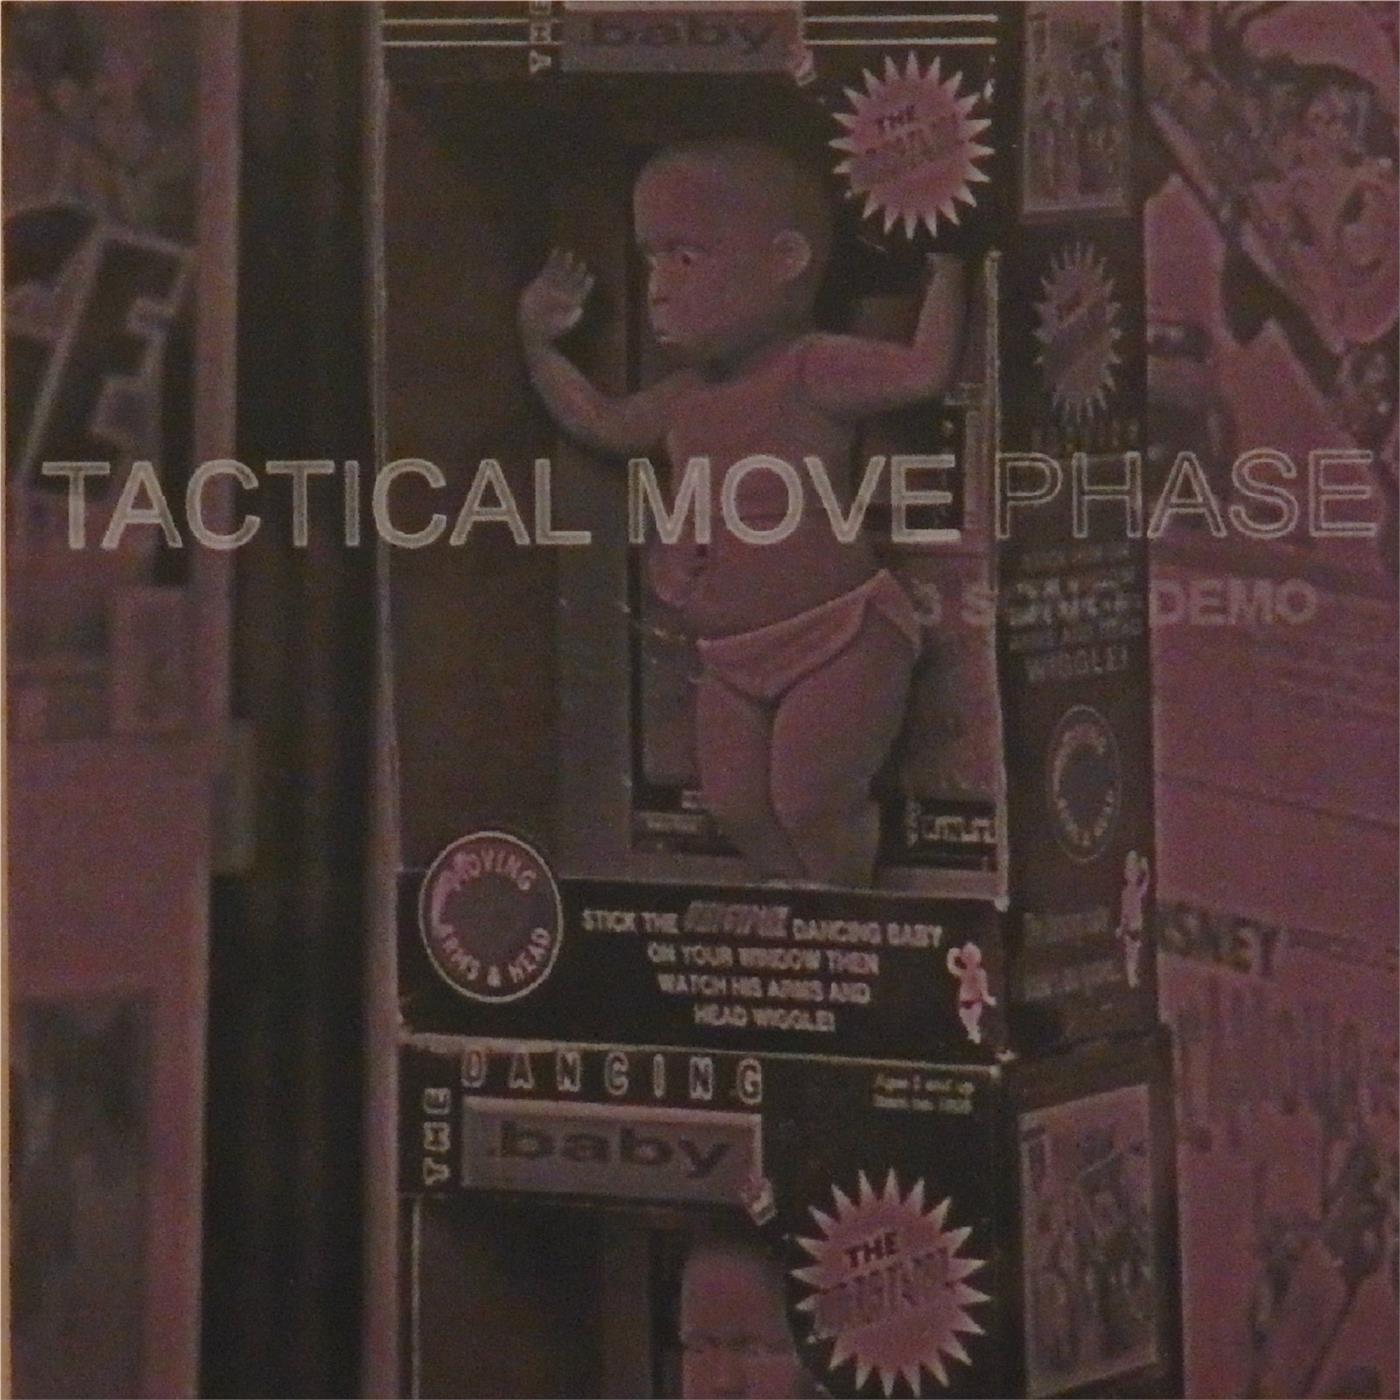 Tactical Move Phase